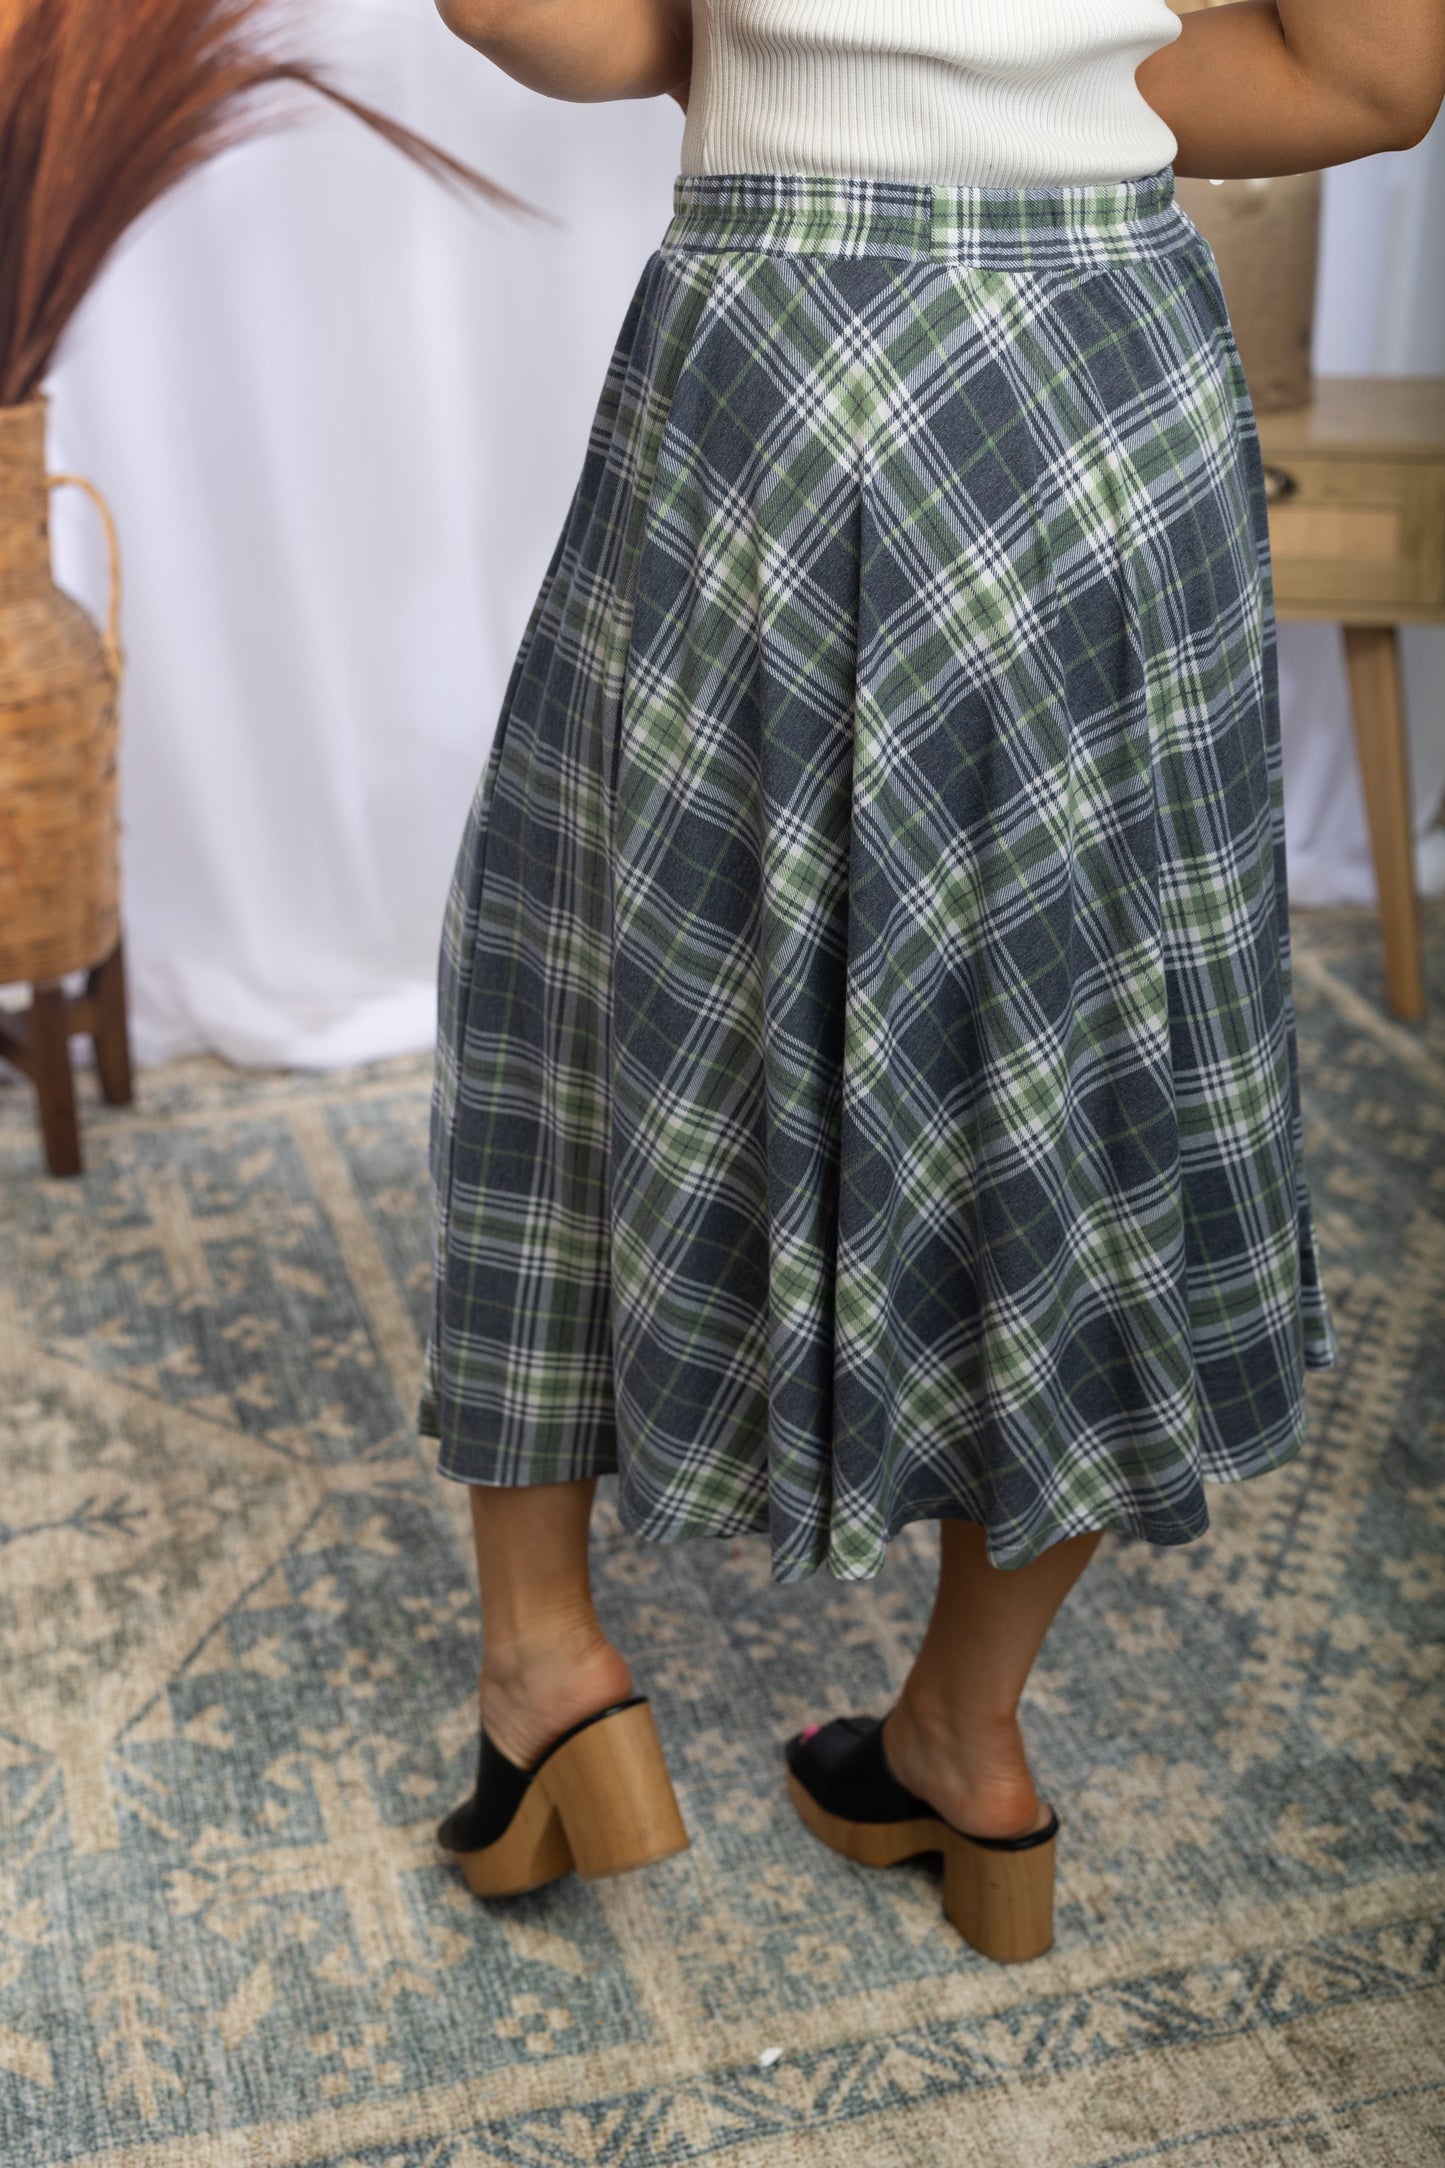 Playful In Plaid - Skirt